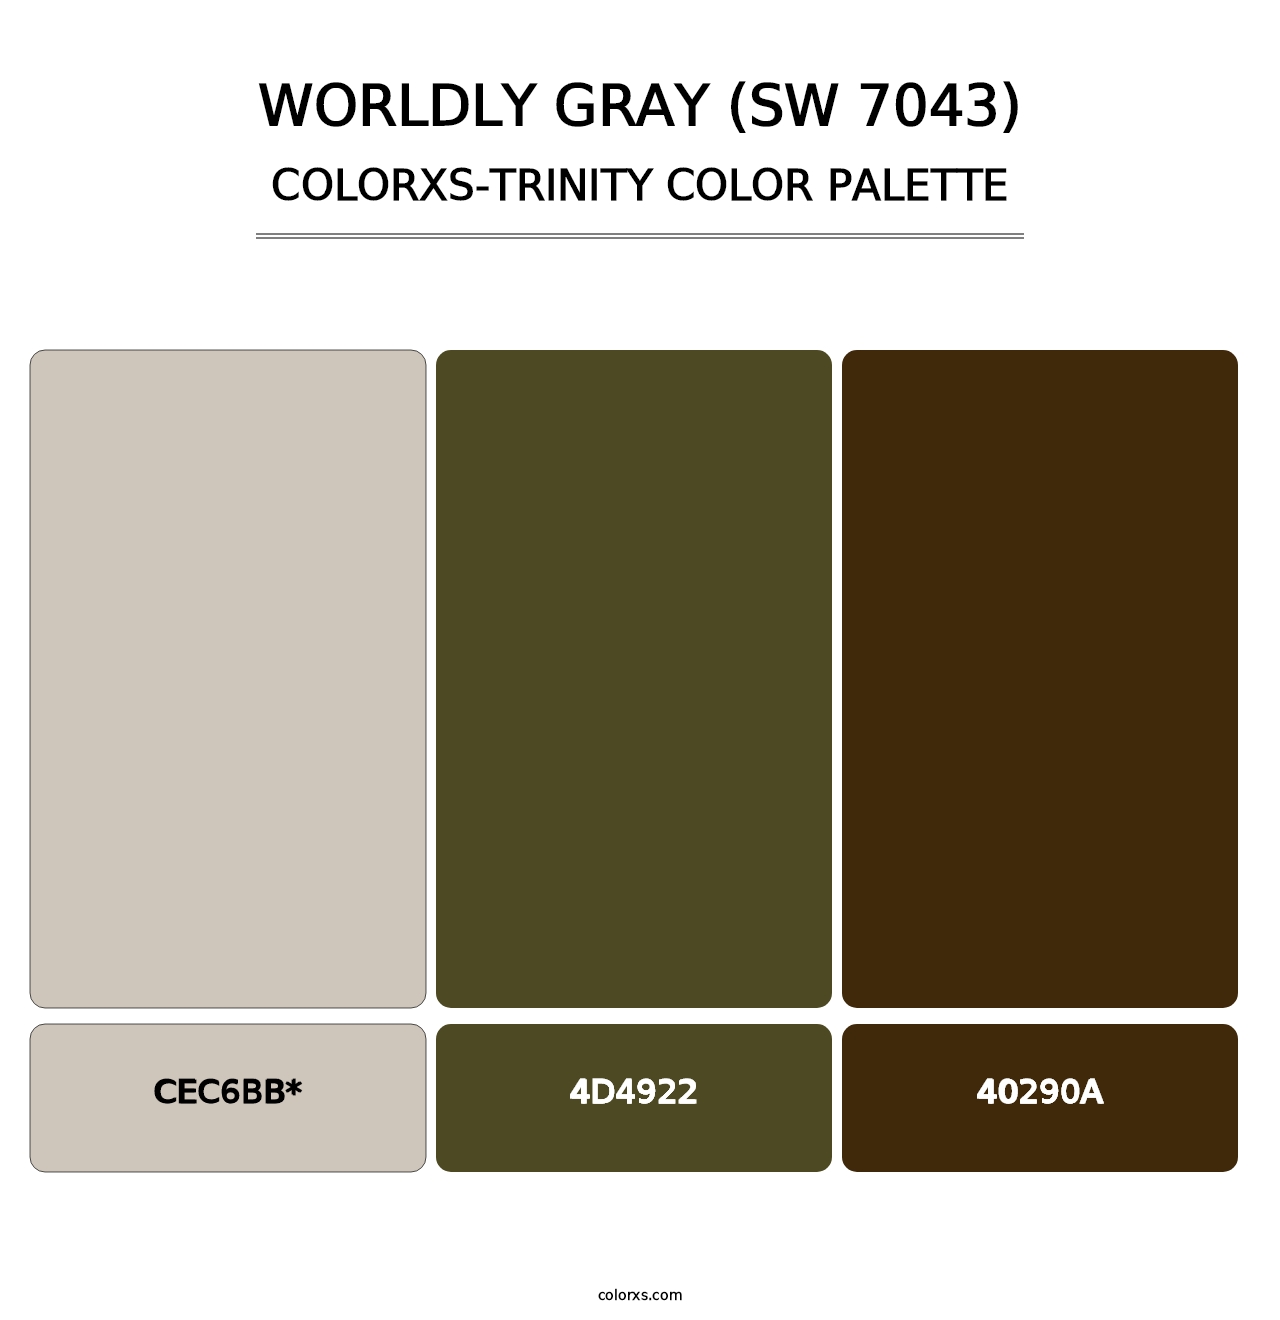 Worldly Gray (SW 7043) - Colorxs Trinity Palette